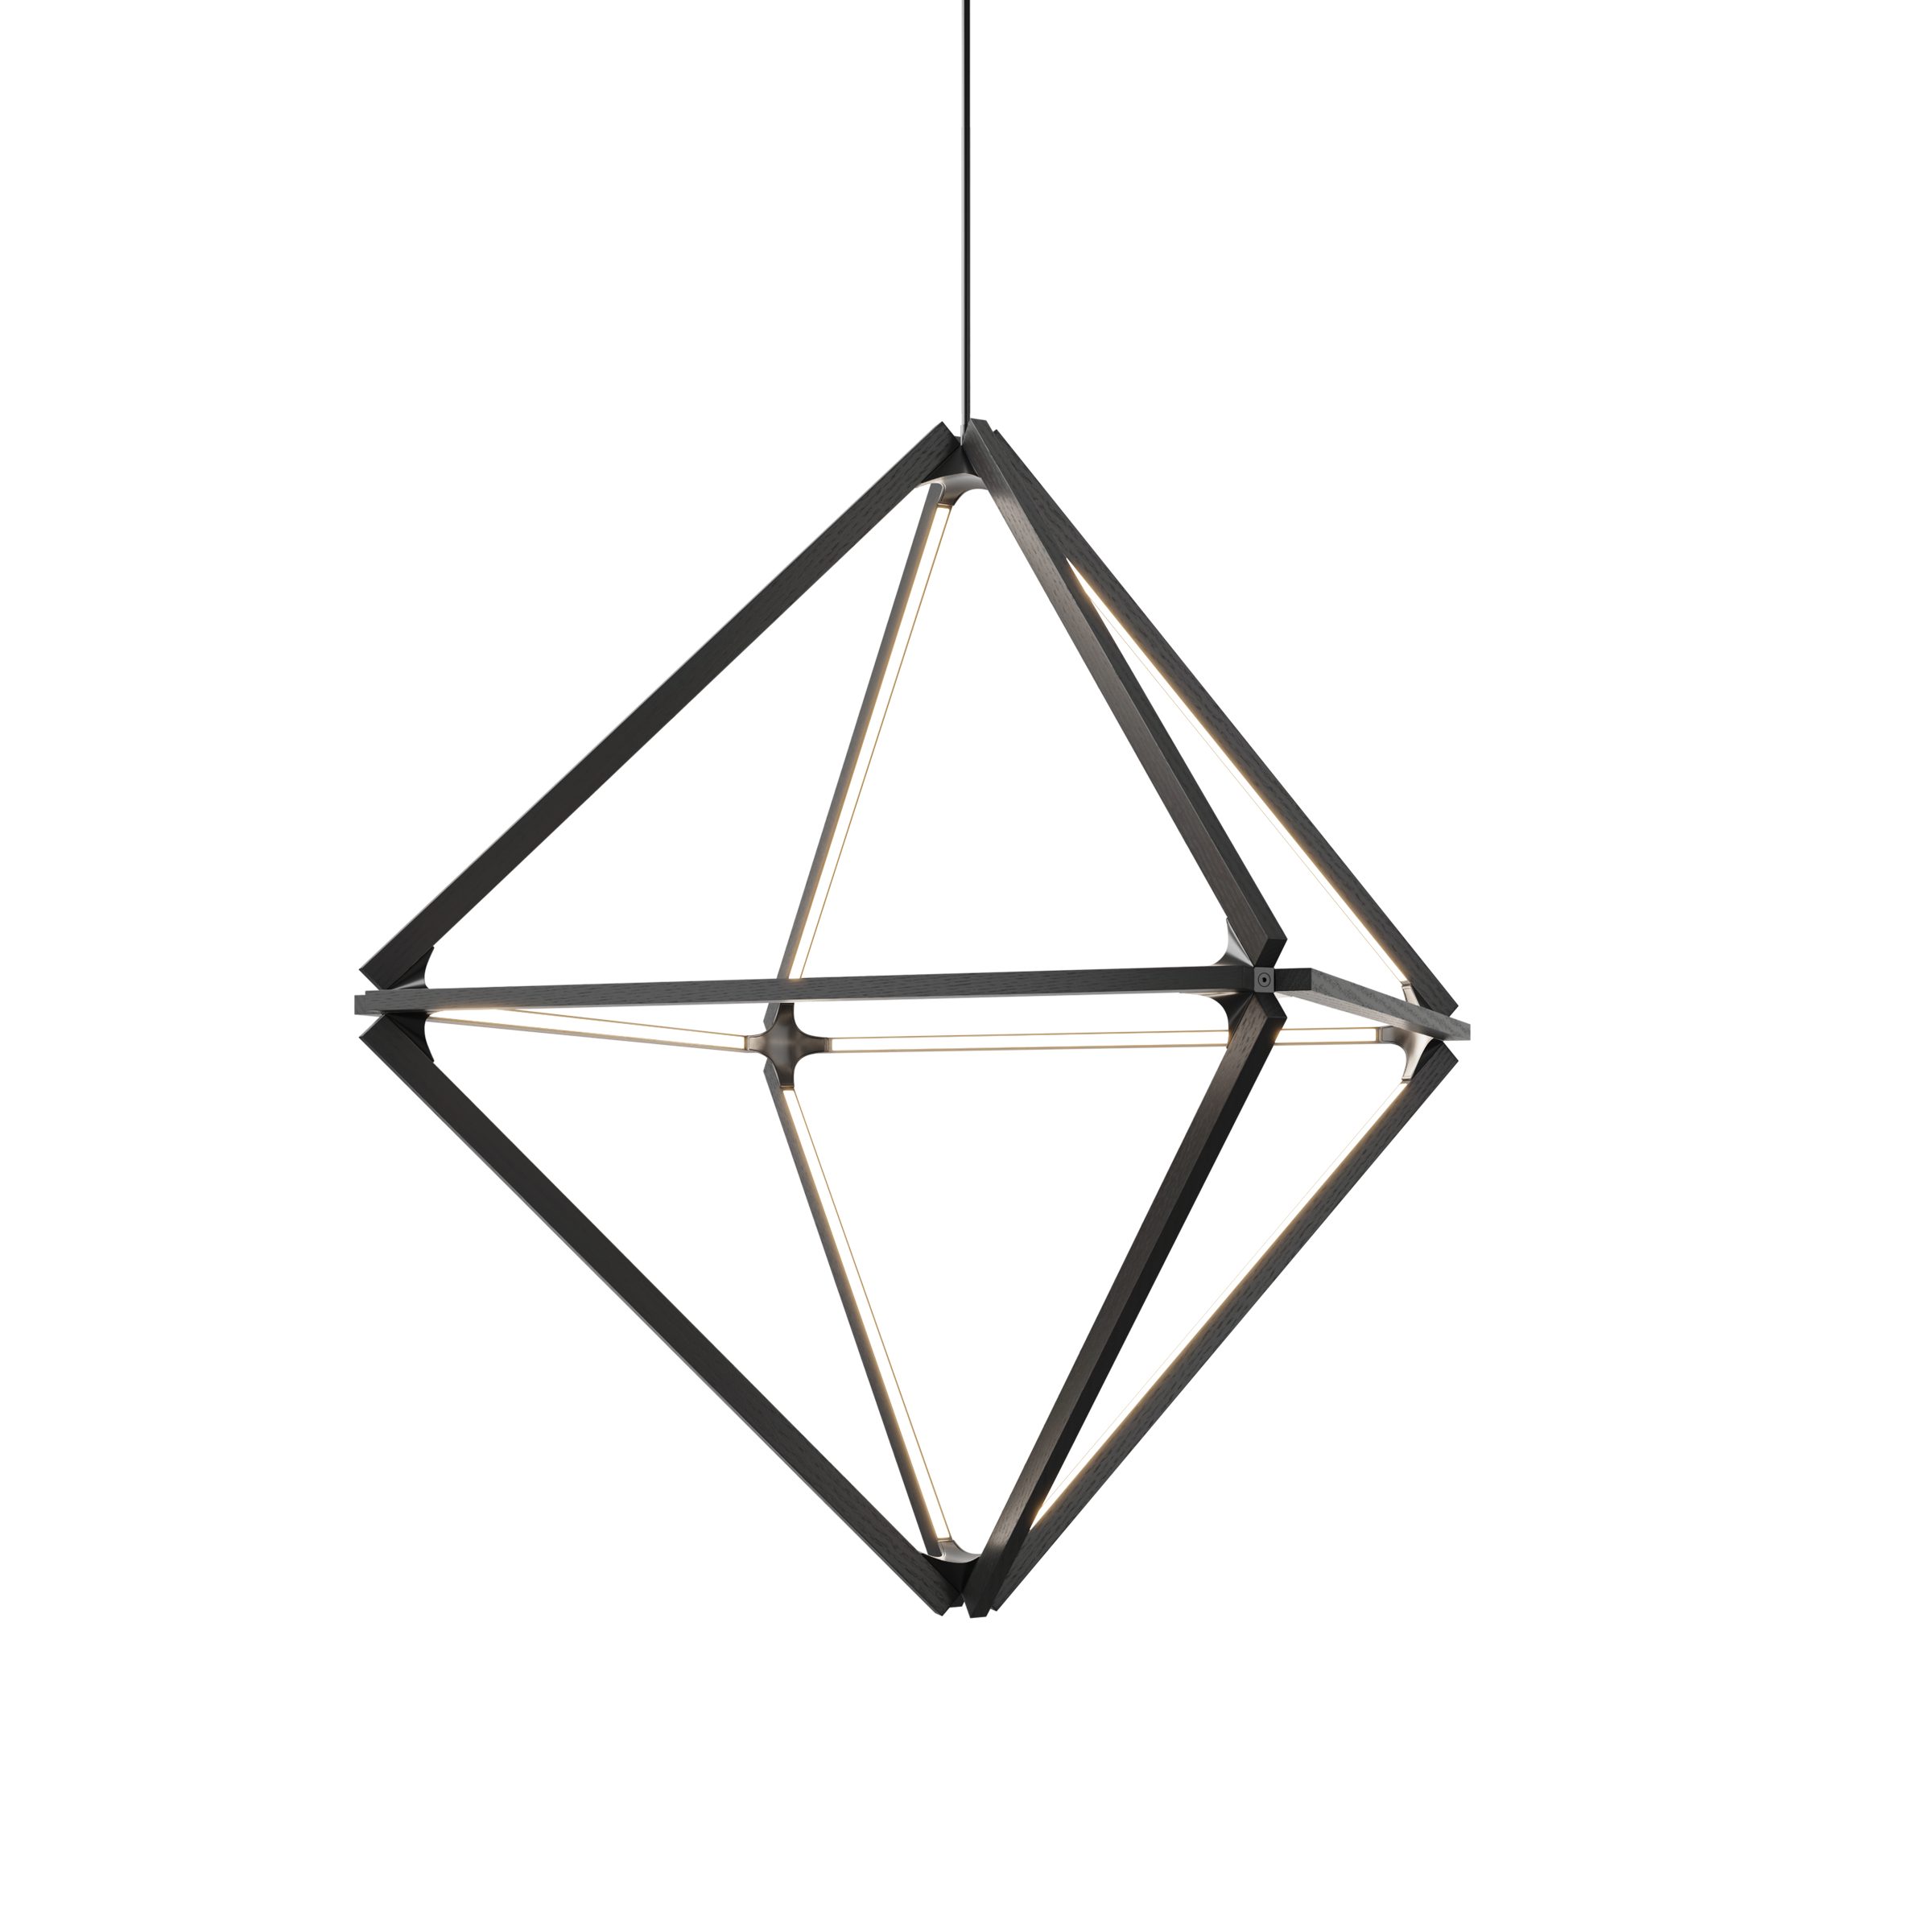 Image of a Stickbulb Diamond lighting fixture. The modern fixture consists of sleek wooden beams with multiple integrated LED bulbs.